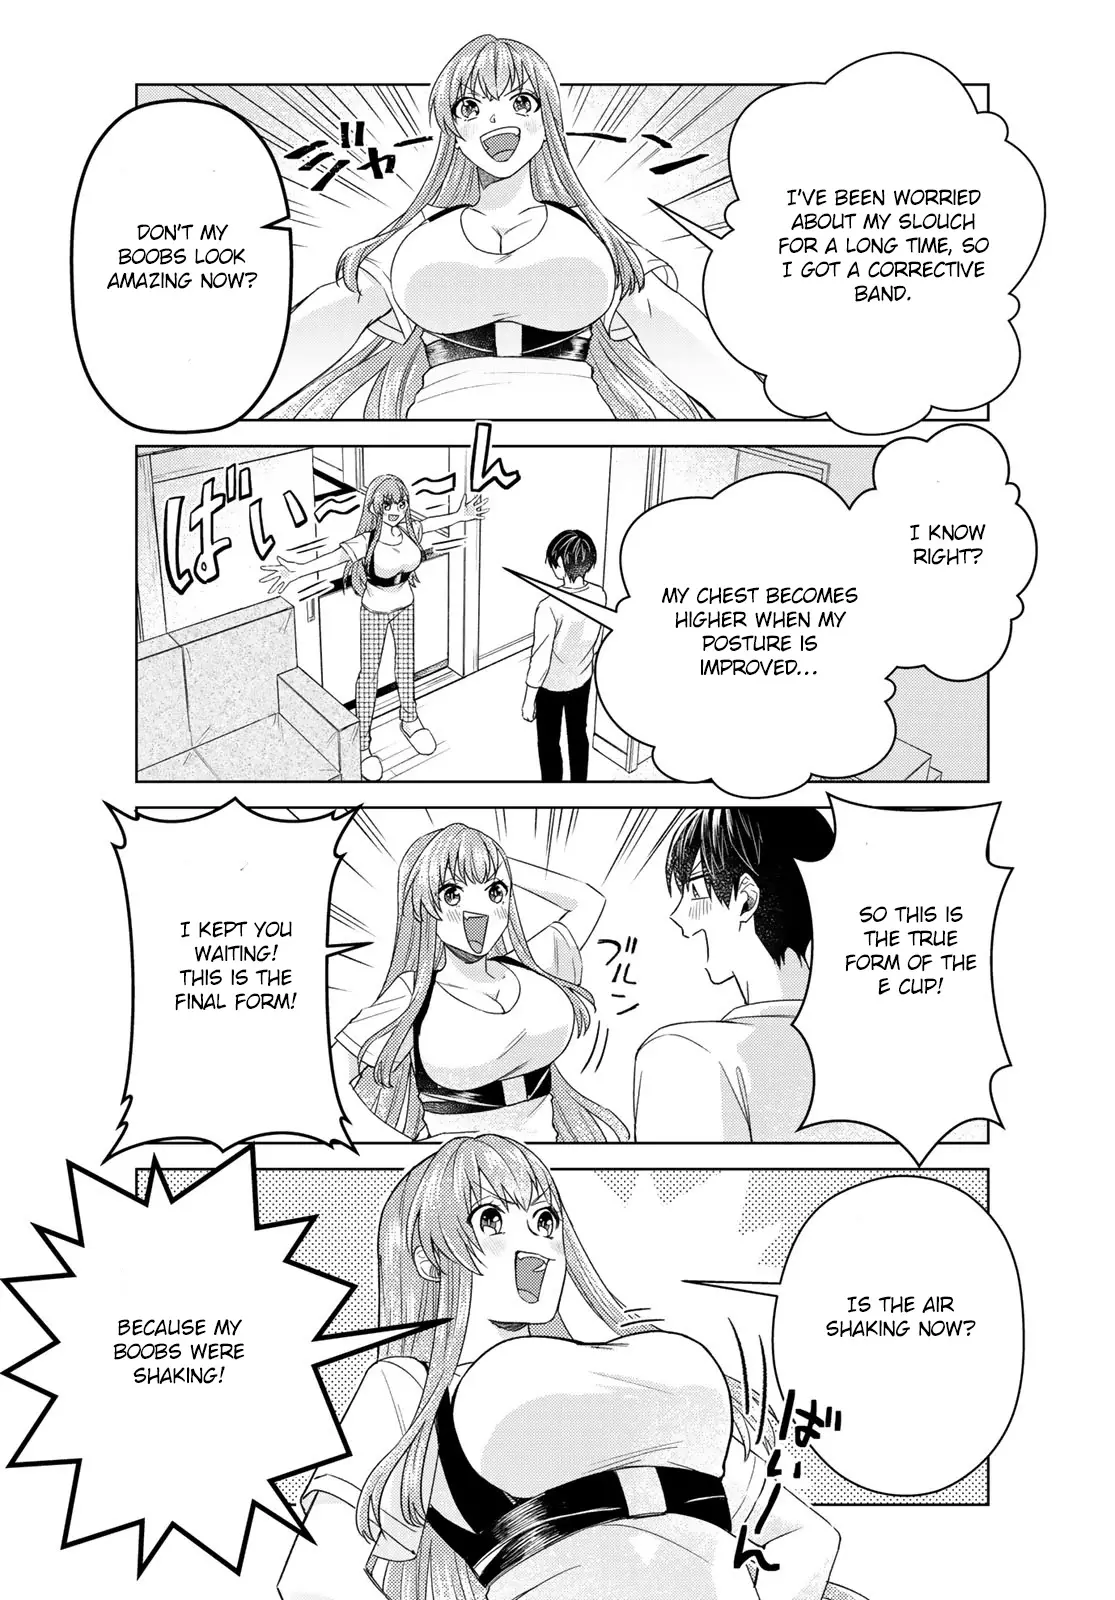 My Perfect Girlfriend! - 27 page 6-17960c46